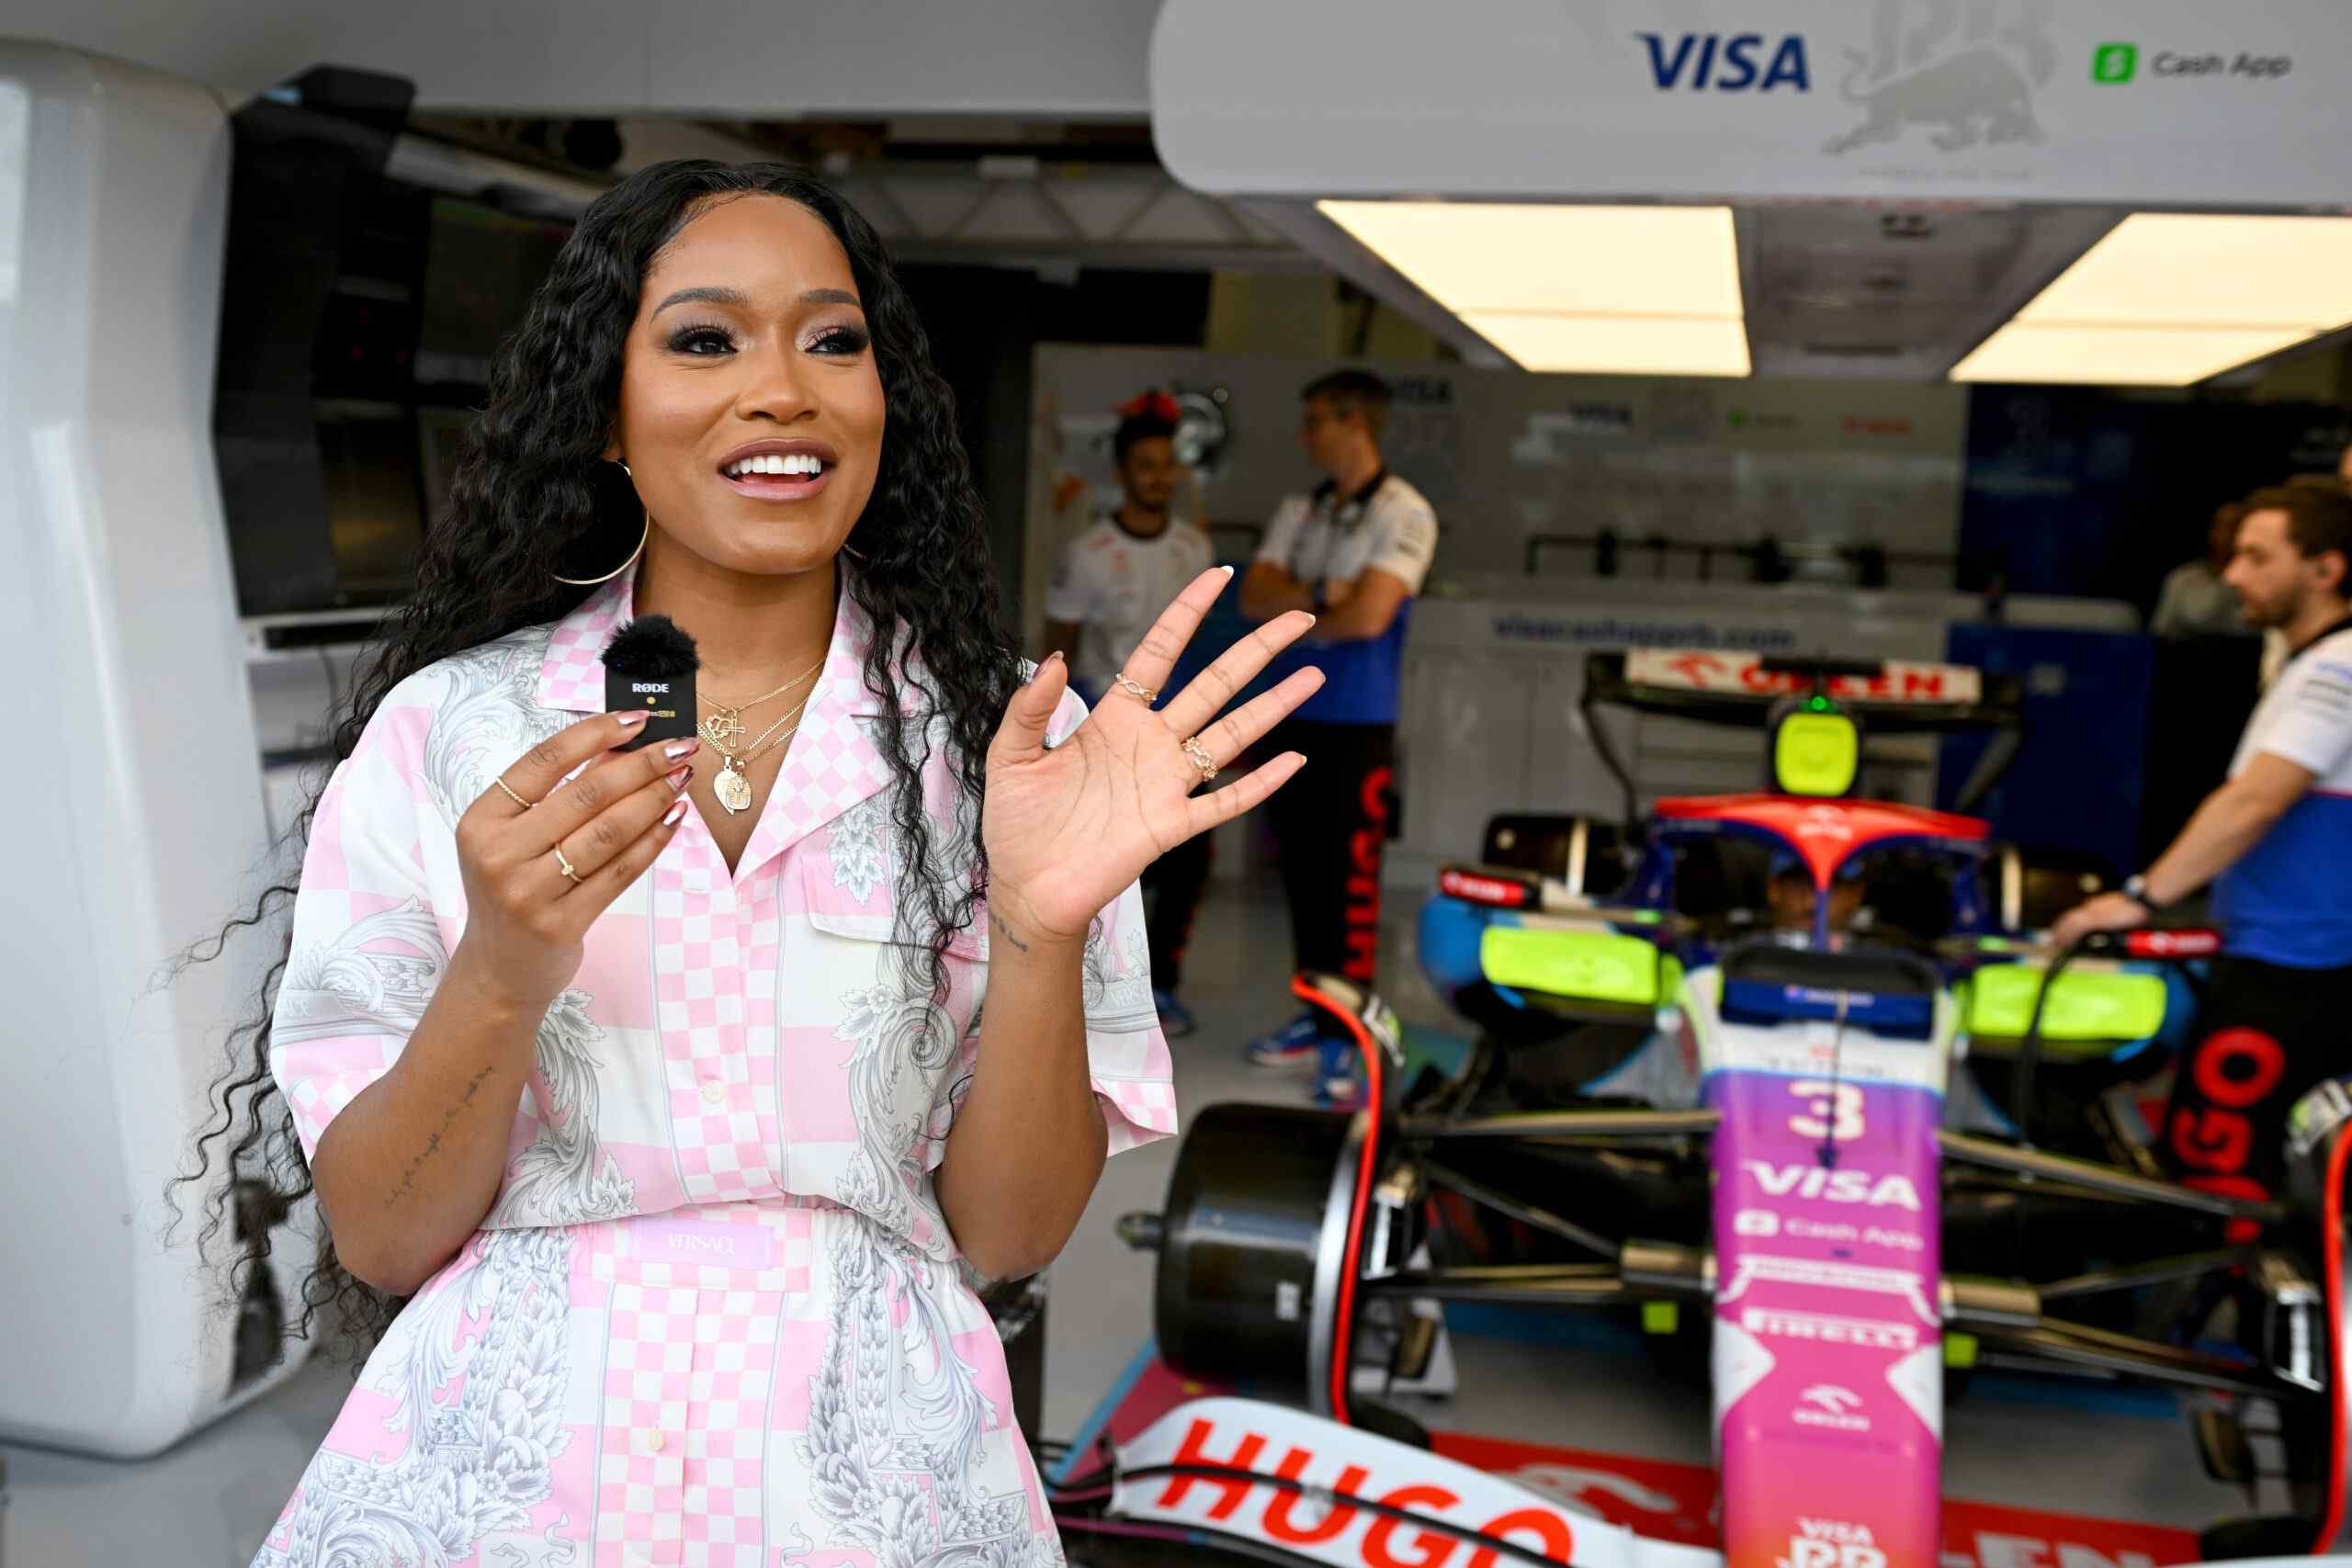 Keke Palmer On Her First Time At The Miami Grand Prix And Souvenirs She’s Taking Her 1-Year-Old Son Leo